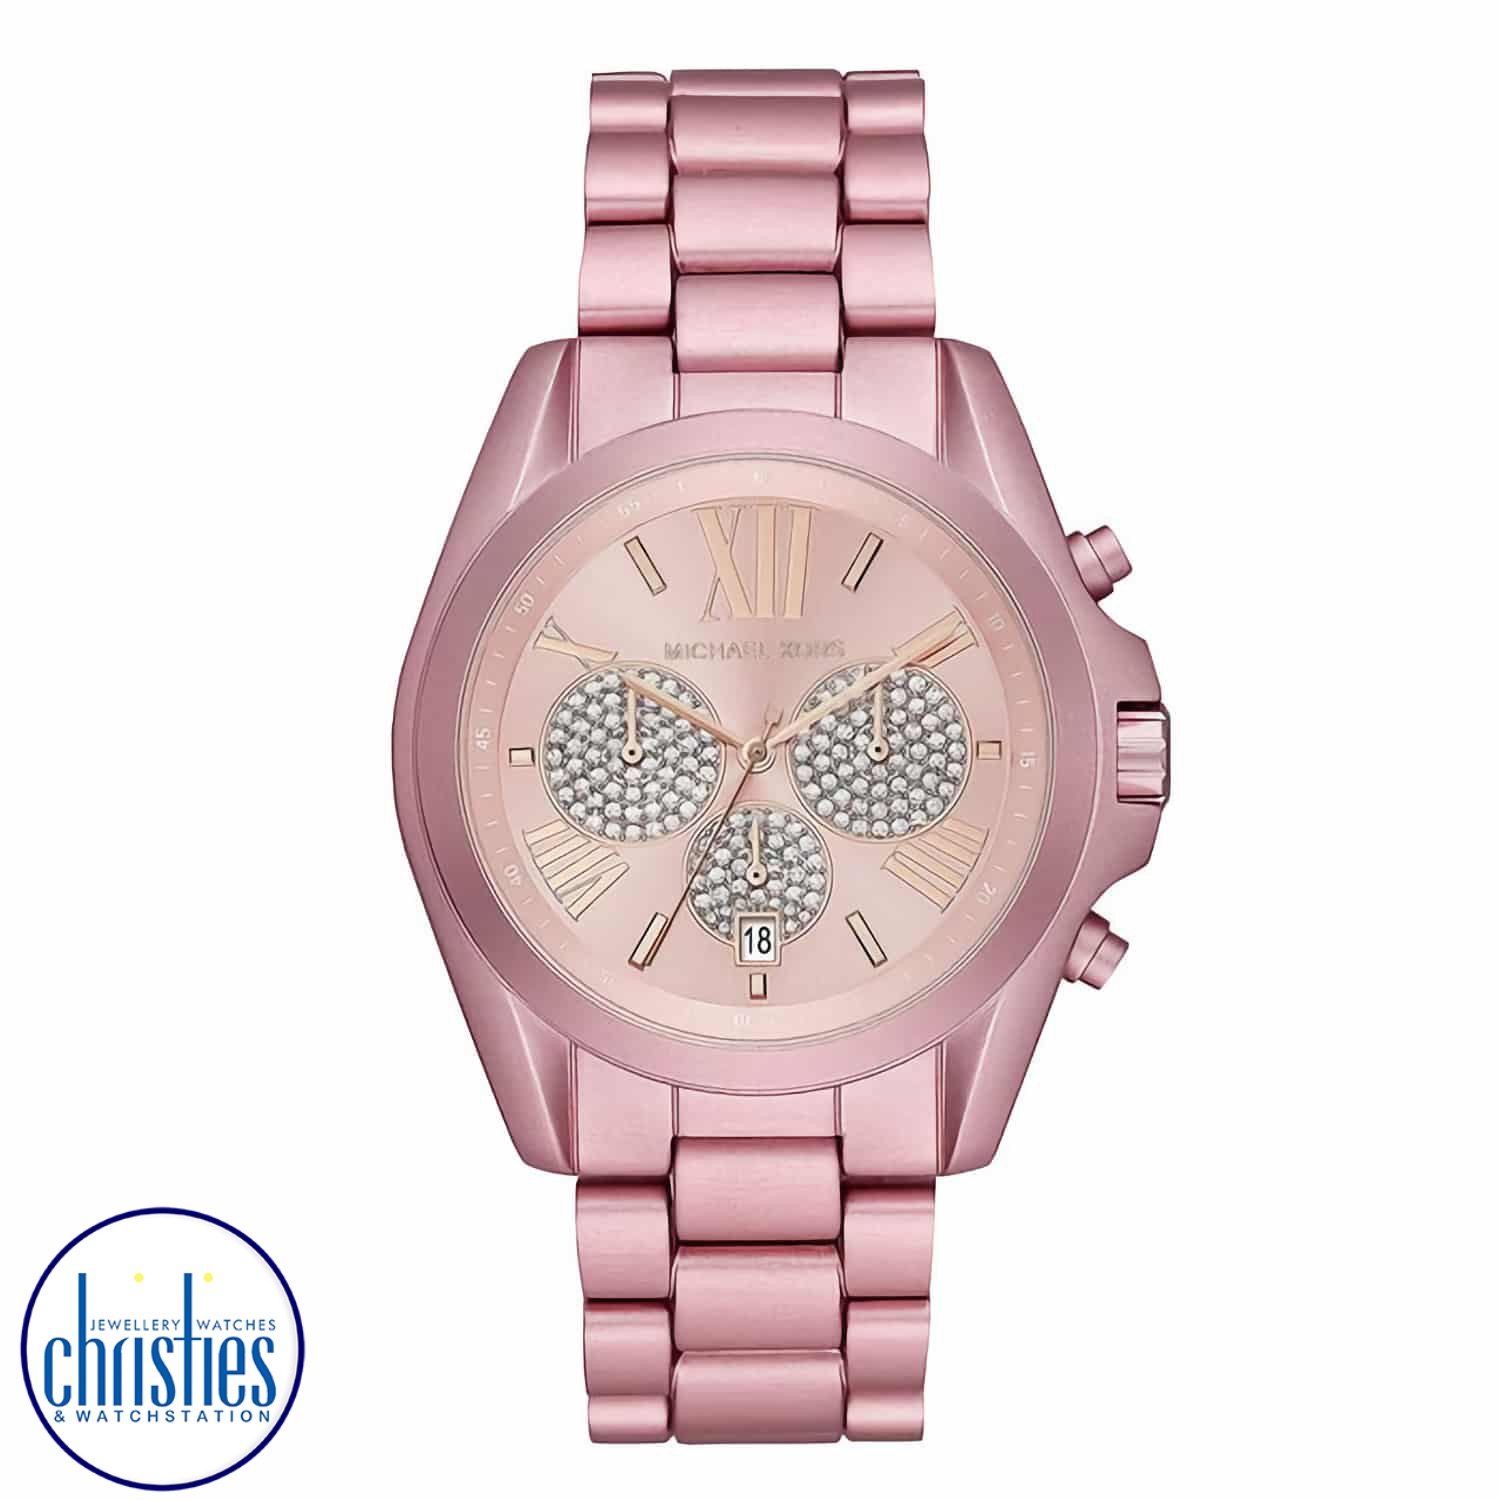 MK6752 Michael Kors  Bradshaw Chronograph Watch. In the pink with lots of glitter the MK6752 Michael Kors  Bradshaw Chronograph Watch  Afterpay - Split your purchase into 4 instalments - Pay for your purchase over 4 instalments, due every tw michael kors 